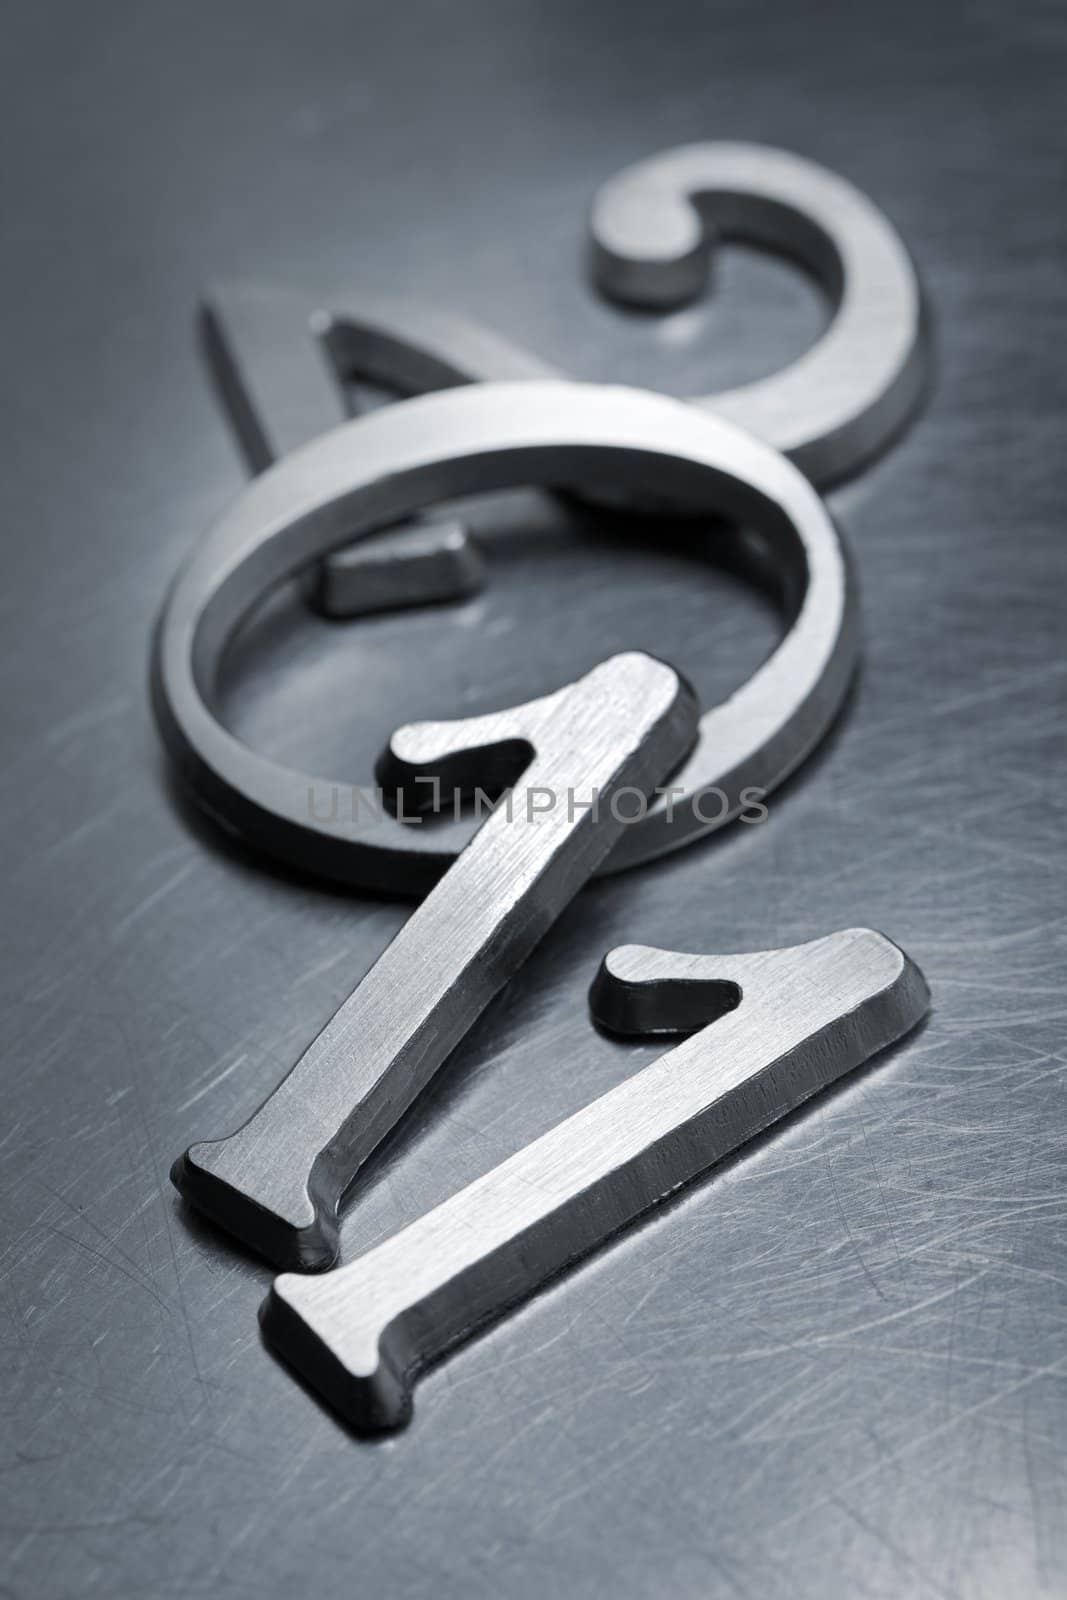 Metallic letters that can be used for number "2011" on scratched metallic background. Short depth of field.